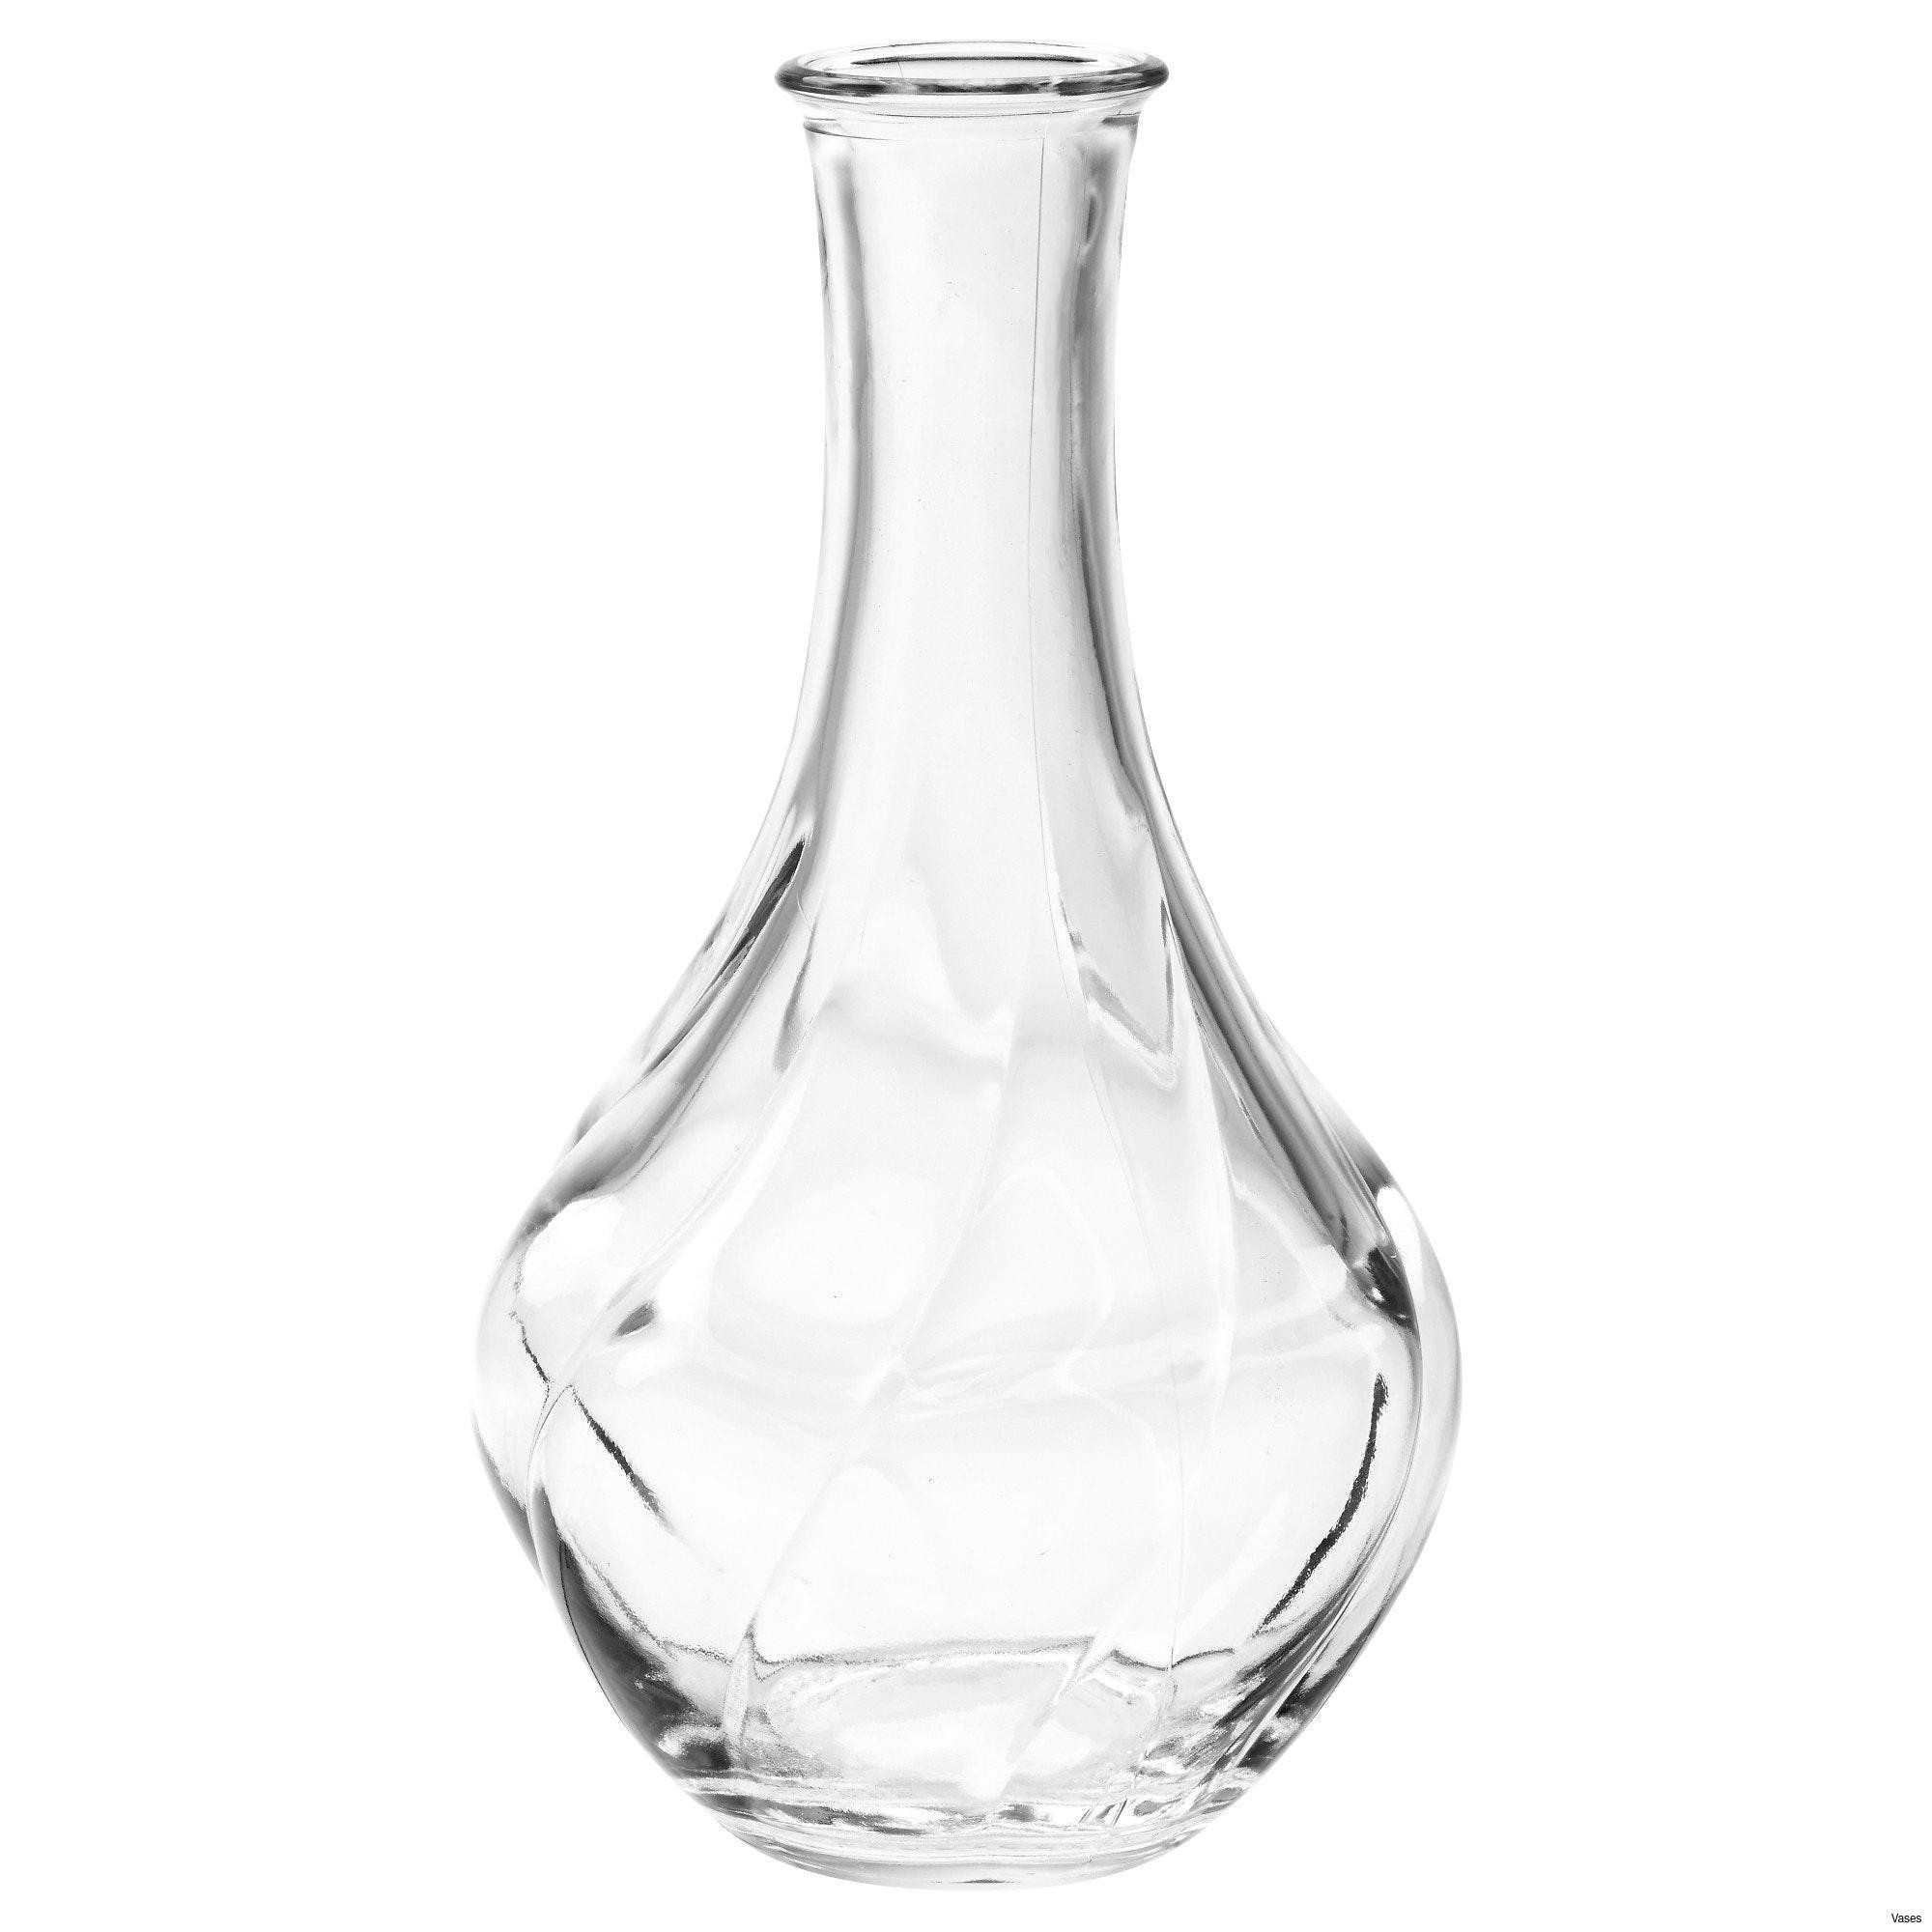 5 Inch Round Glass Vase Of 11 Beautiful Clear Tall Glass Vases Bogekompresorturkiye Com with Regard to Living Room Glass Vases Fresh Clear Vase 0d Tags Amazing and Also White Interior Pattern